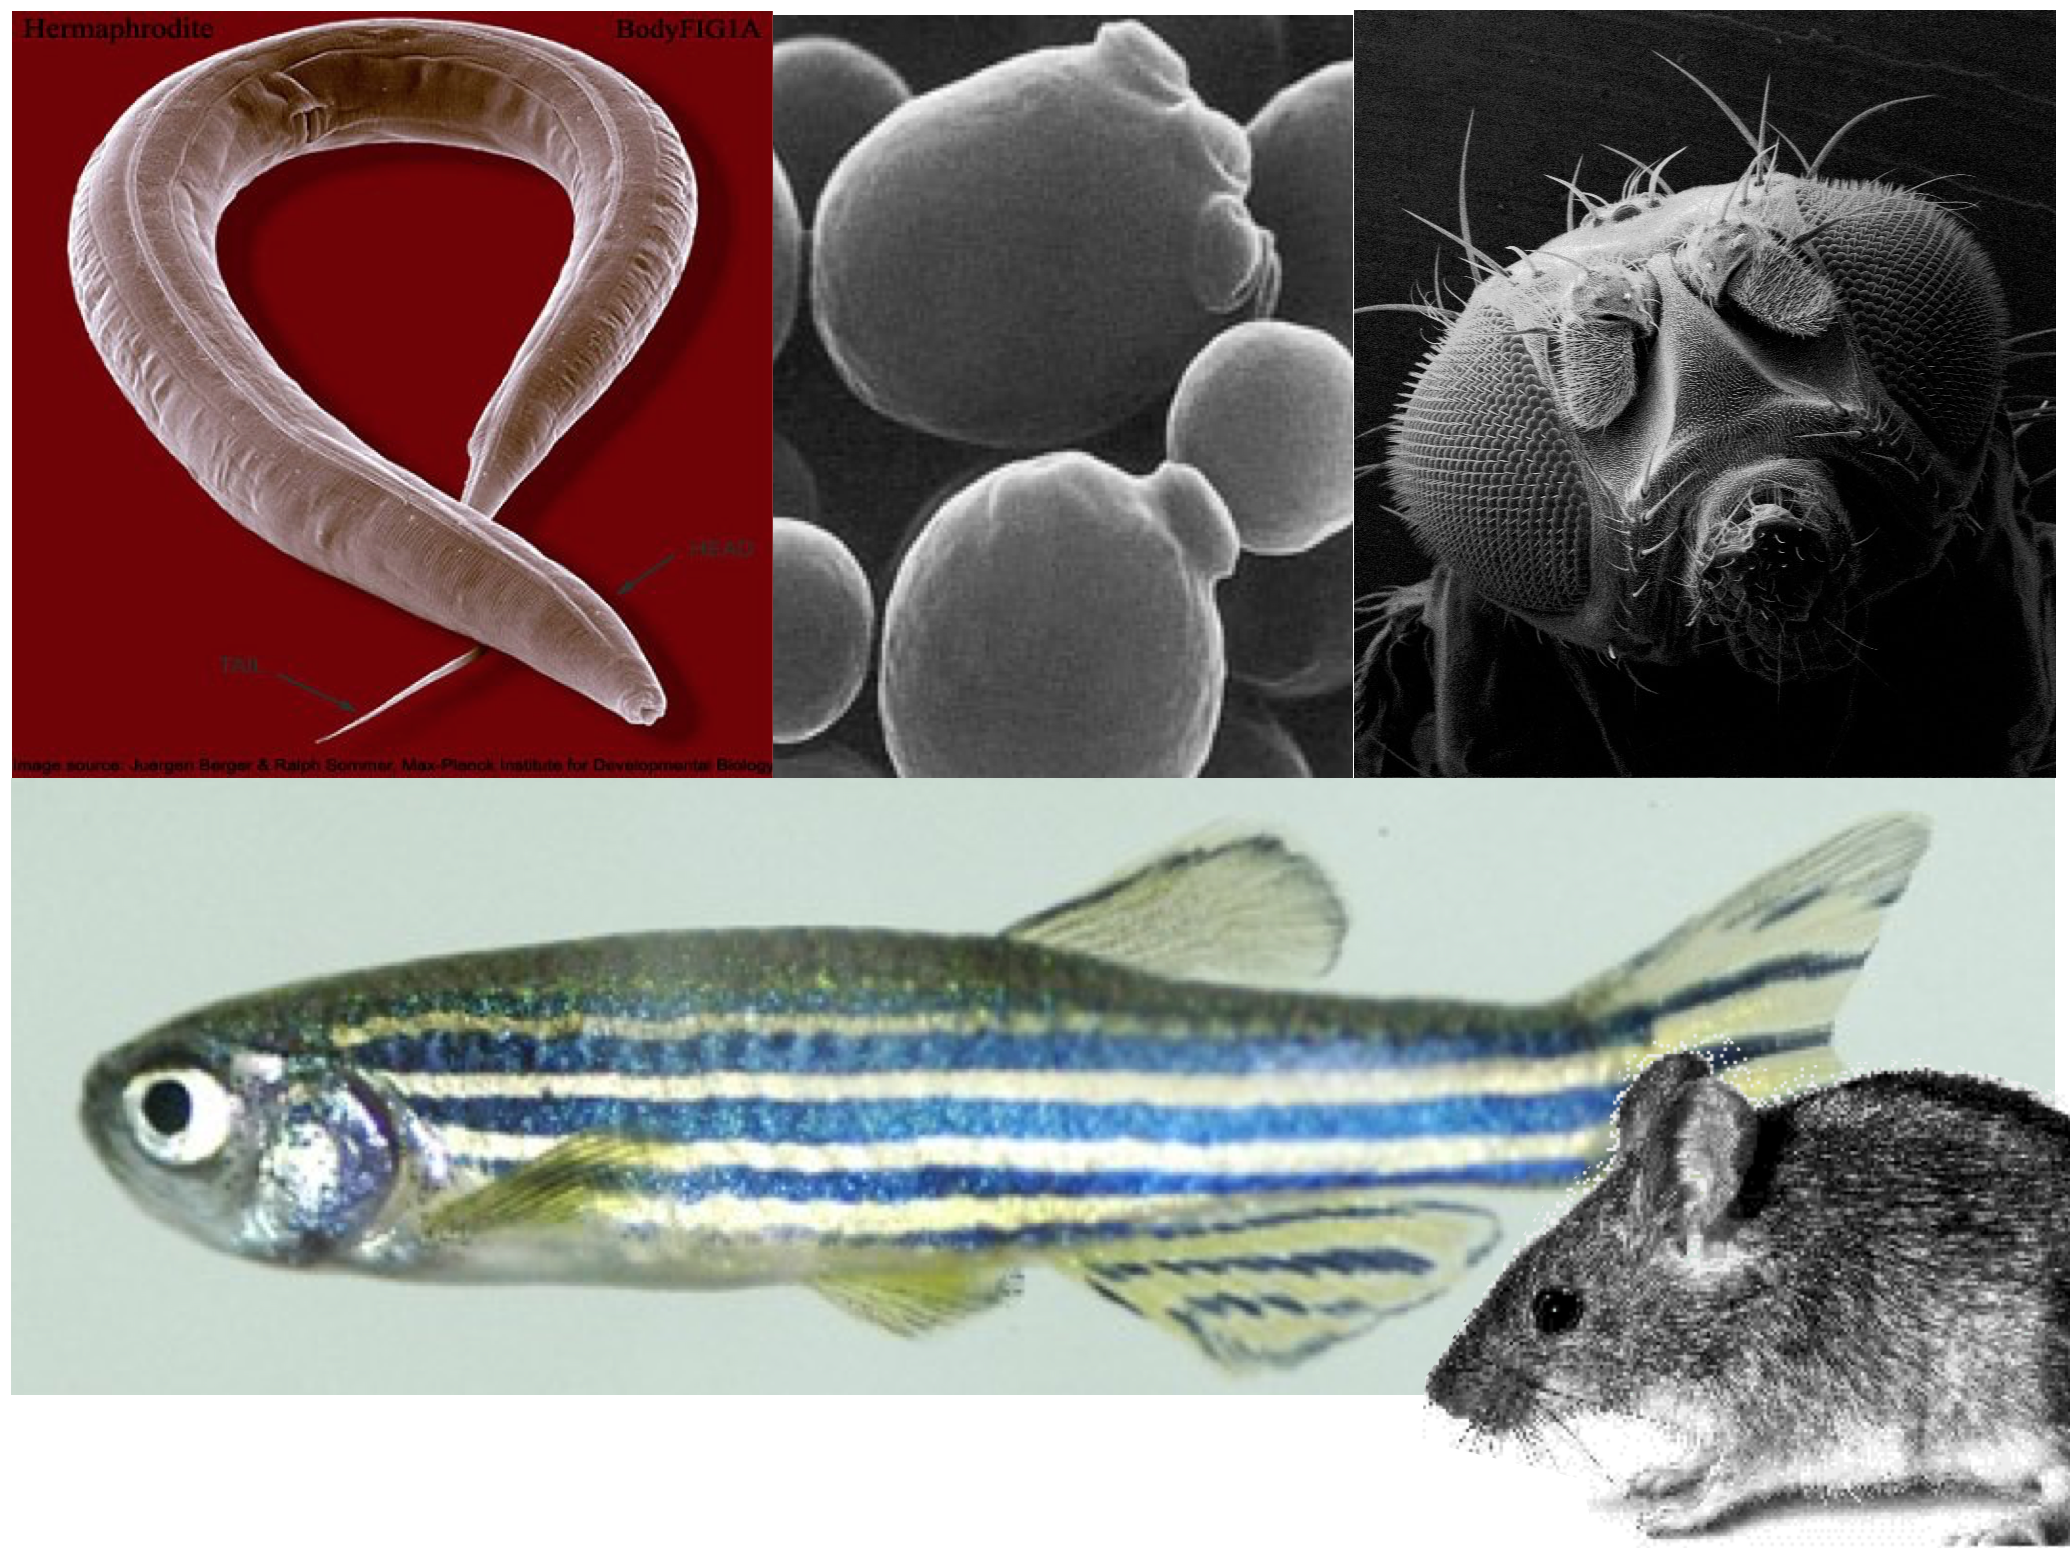 Popular model organisms used in genetic research. Clockwise from top left: *Caenorhaditis elegans* (round worm), *Saccharomyces cerevisiae* (budding yeast), *Drosophila melanogaster* (fruit fly), *Mus musculus*, (house mouse) and *Danio rerio* (zebrafish). Image sources: worm image from [Wormatlas](https://www.wormatlas.org/hermaphrodite/introduction/Introframeset.html), yeast image by Alan Wheals, University of Bath, UK., fly, mouse and fish image sources unknown.